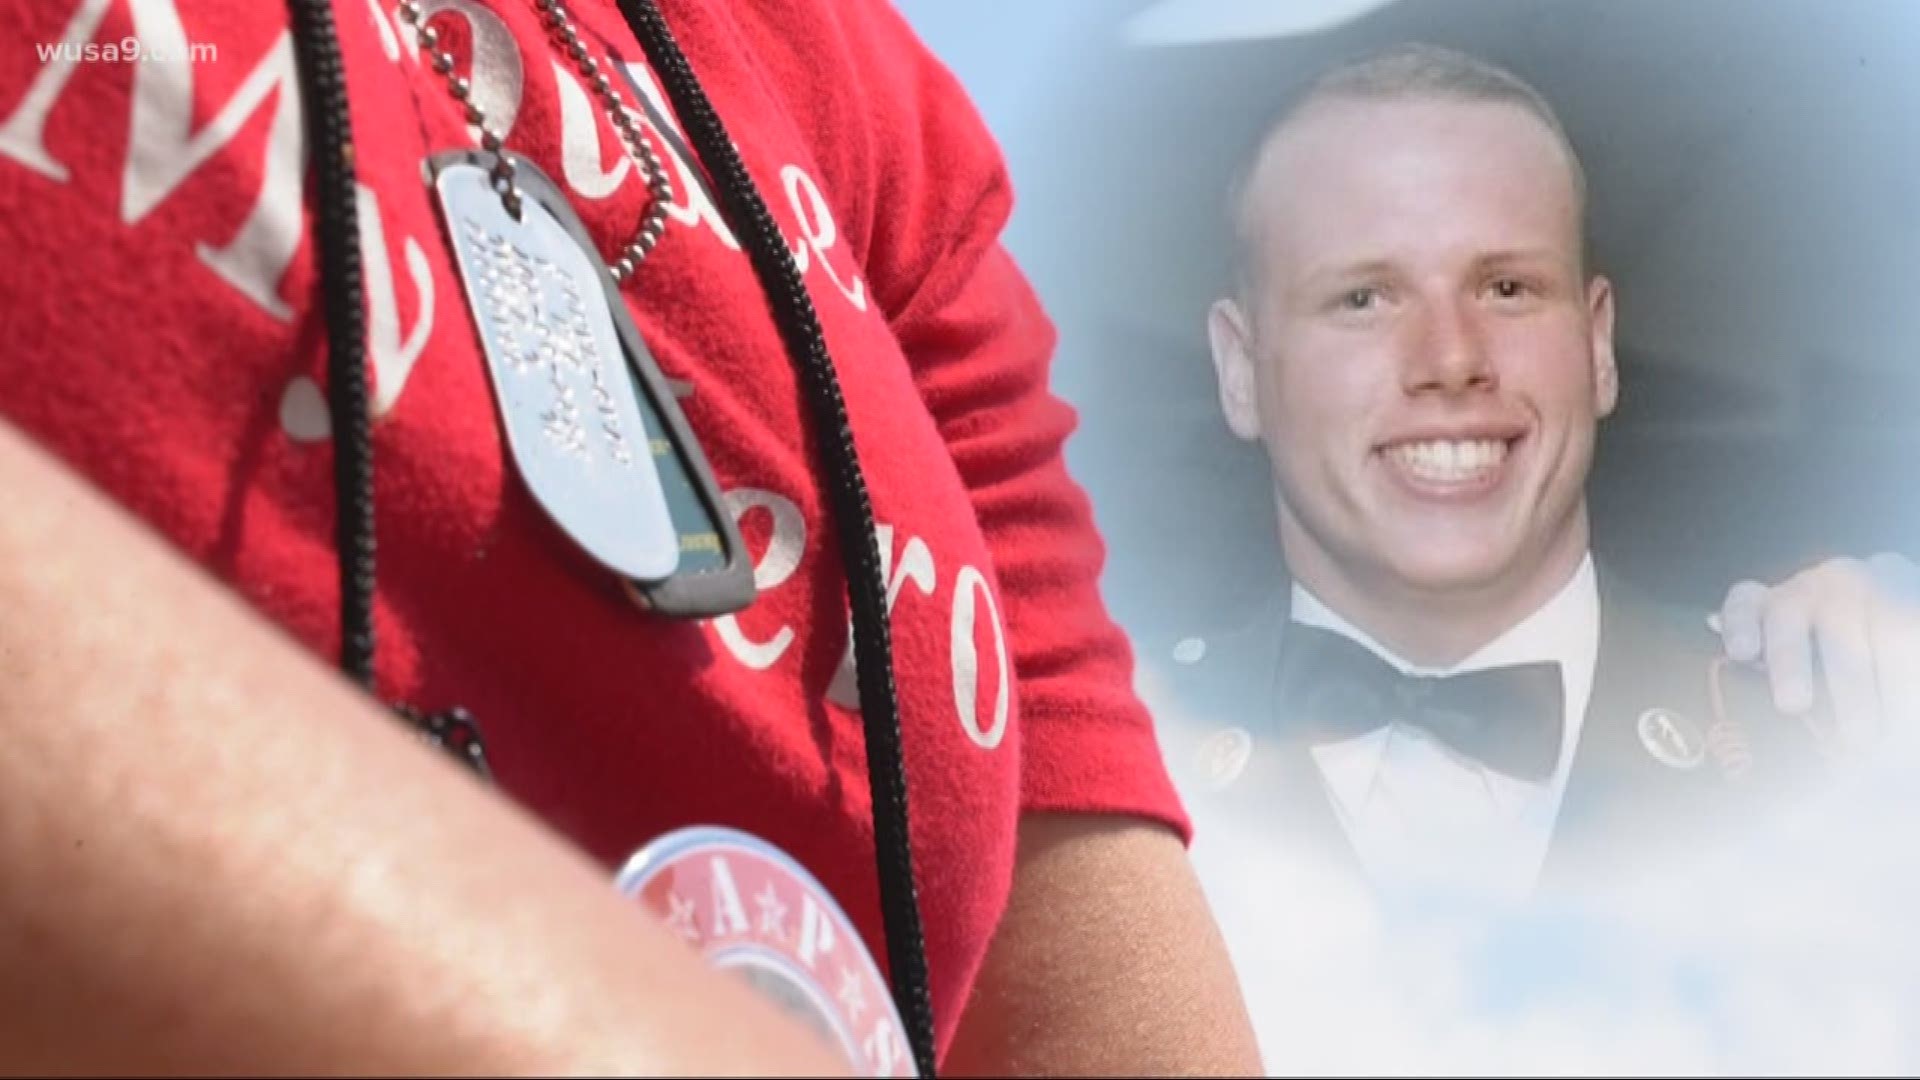 Army SFC James Stoddard, Jr. was killed in Afghanistan in 2005 during his third tour of duty.